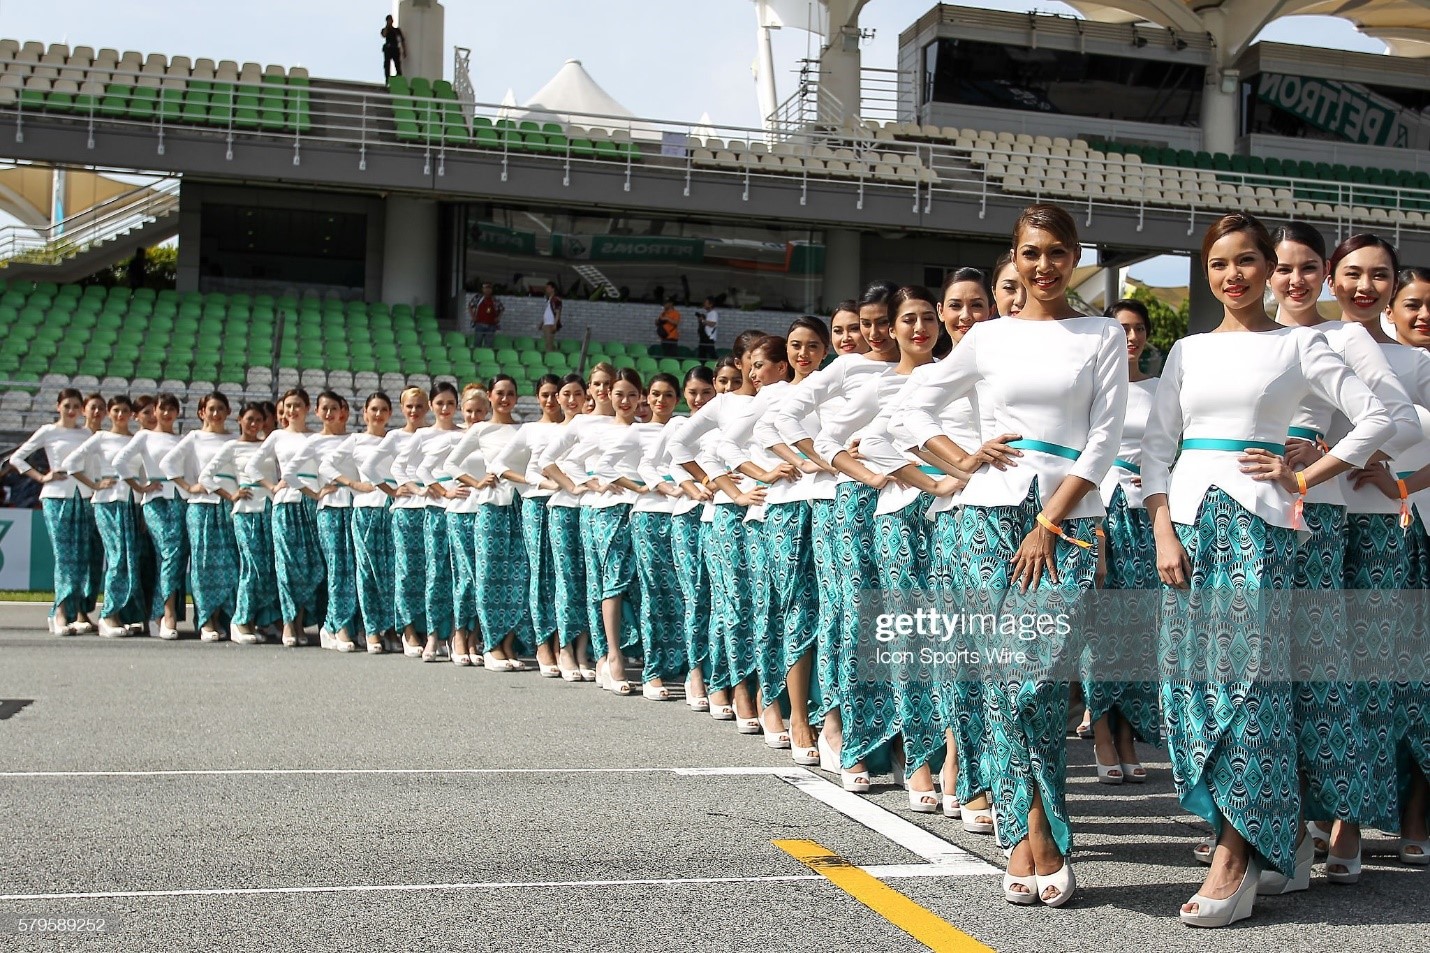 29 March 2015: grid girls pose for photograph before the start of the race of the Formula 1 Malaysia Grand Prix held at Sepang International Circuit in Sepang, Malaysia. 